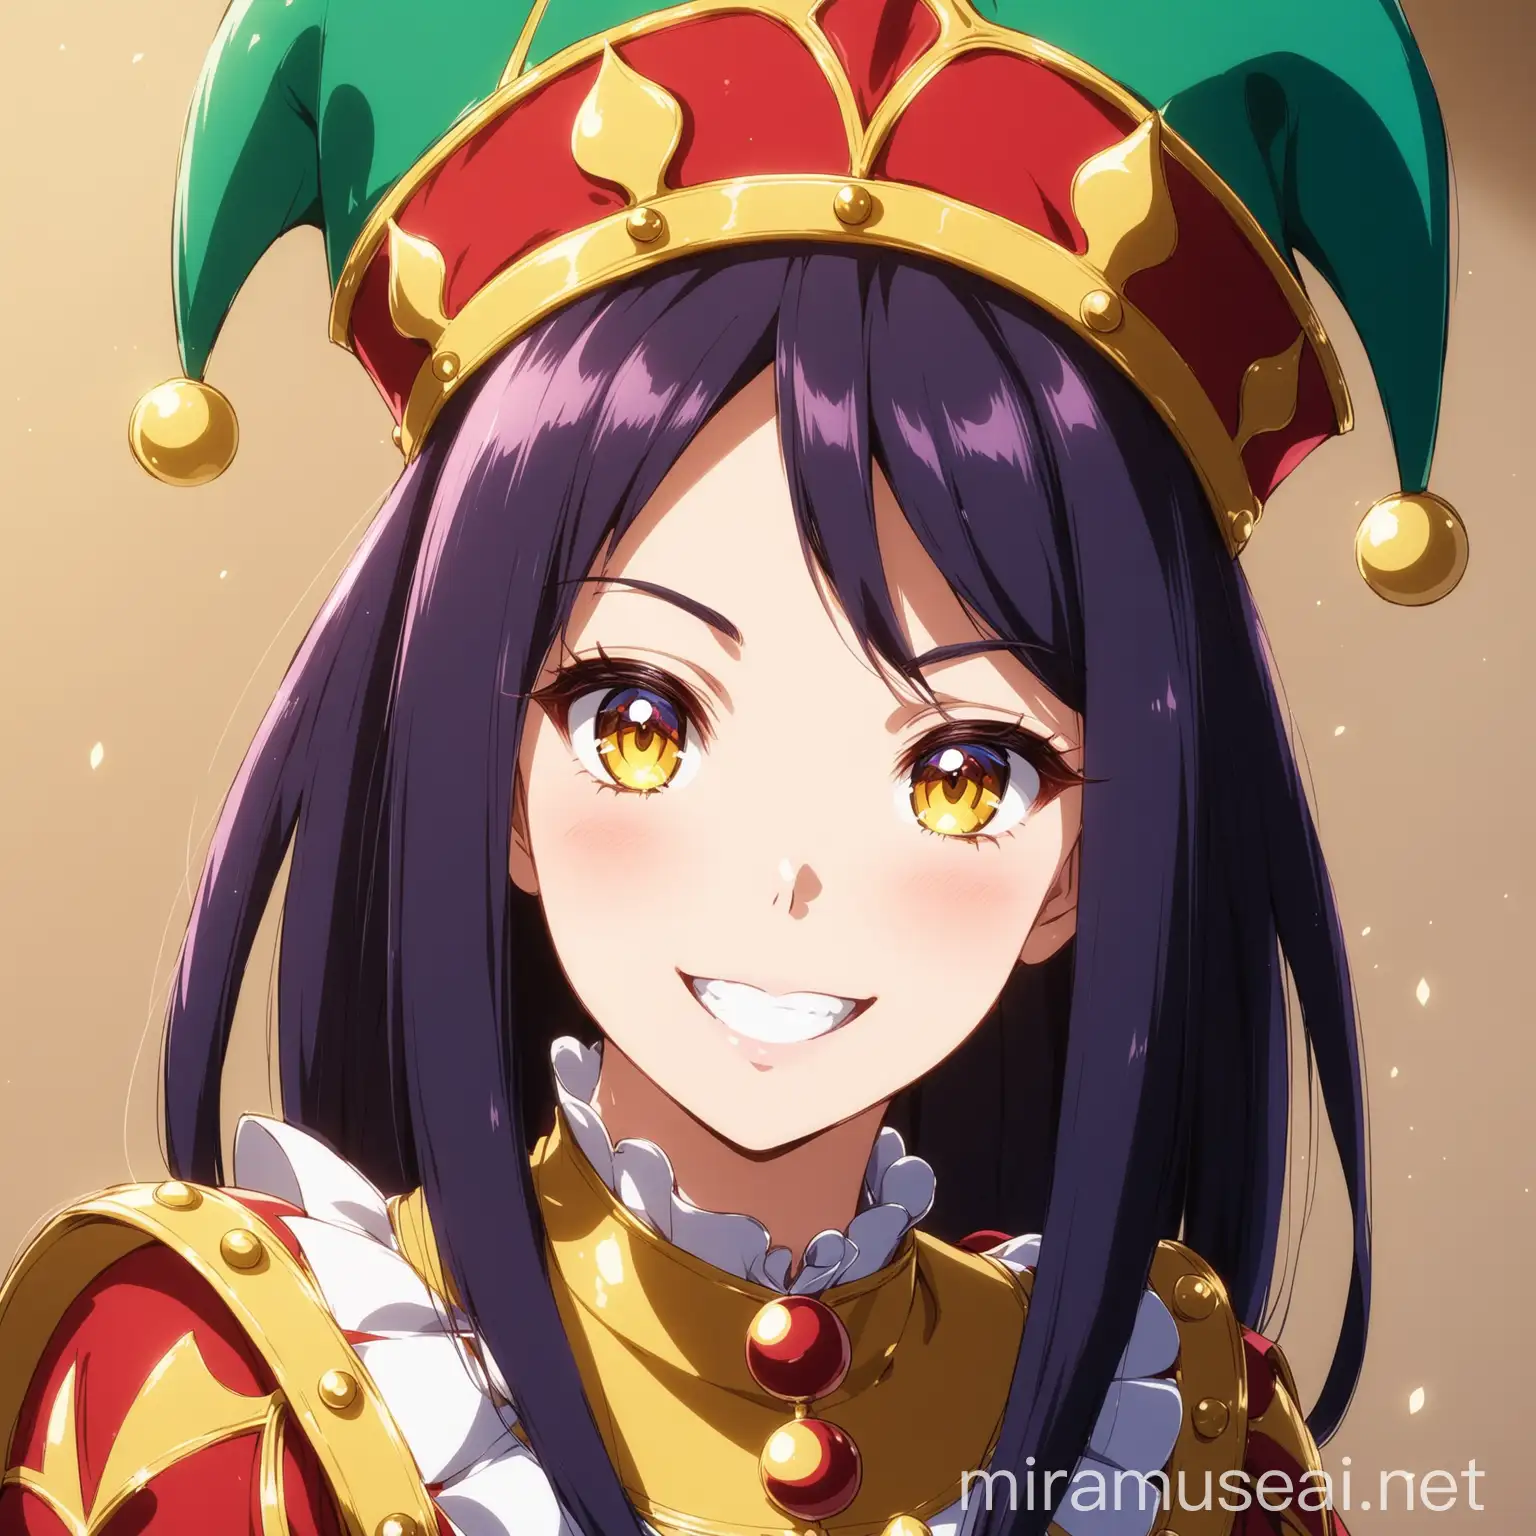 Anime Court Jester Woman Colorful and Playful Character Art